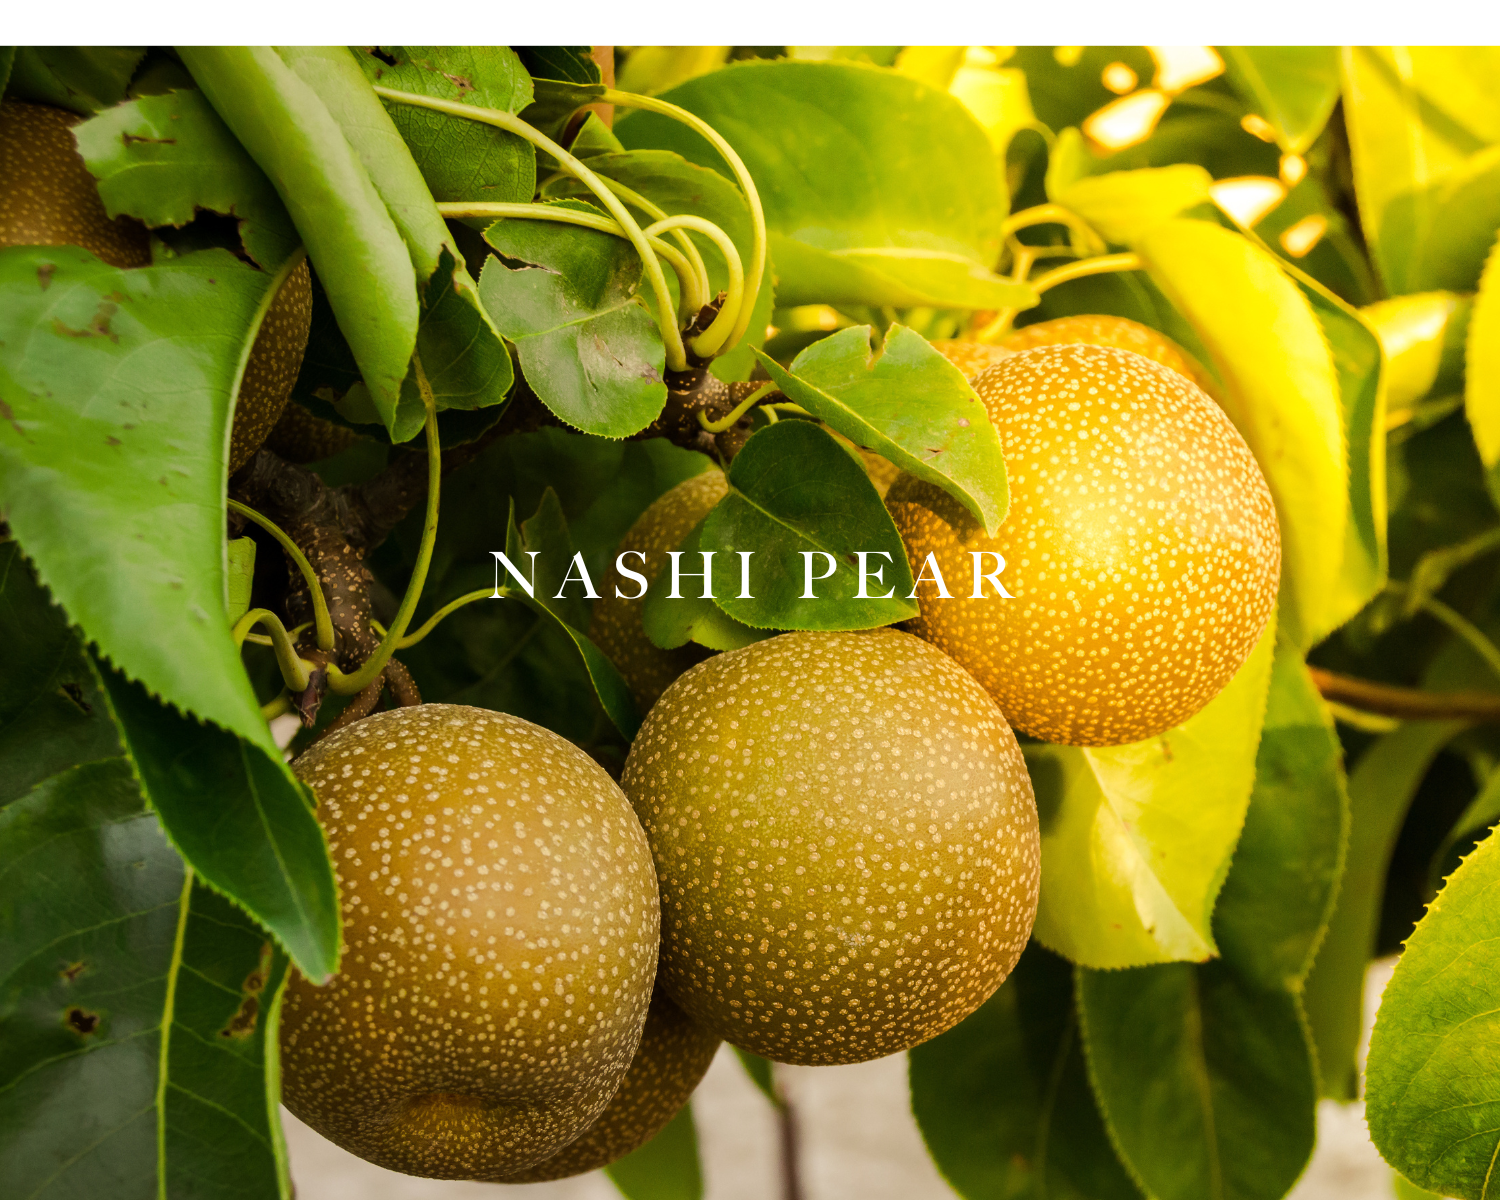 Caswell-Massey Orchid Perfume for Women image showing Nashi pears to represent one of the scent notes